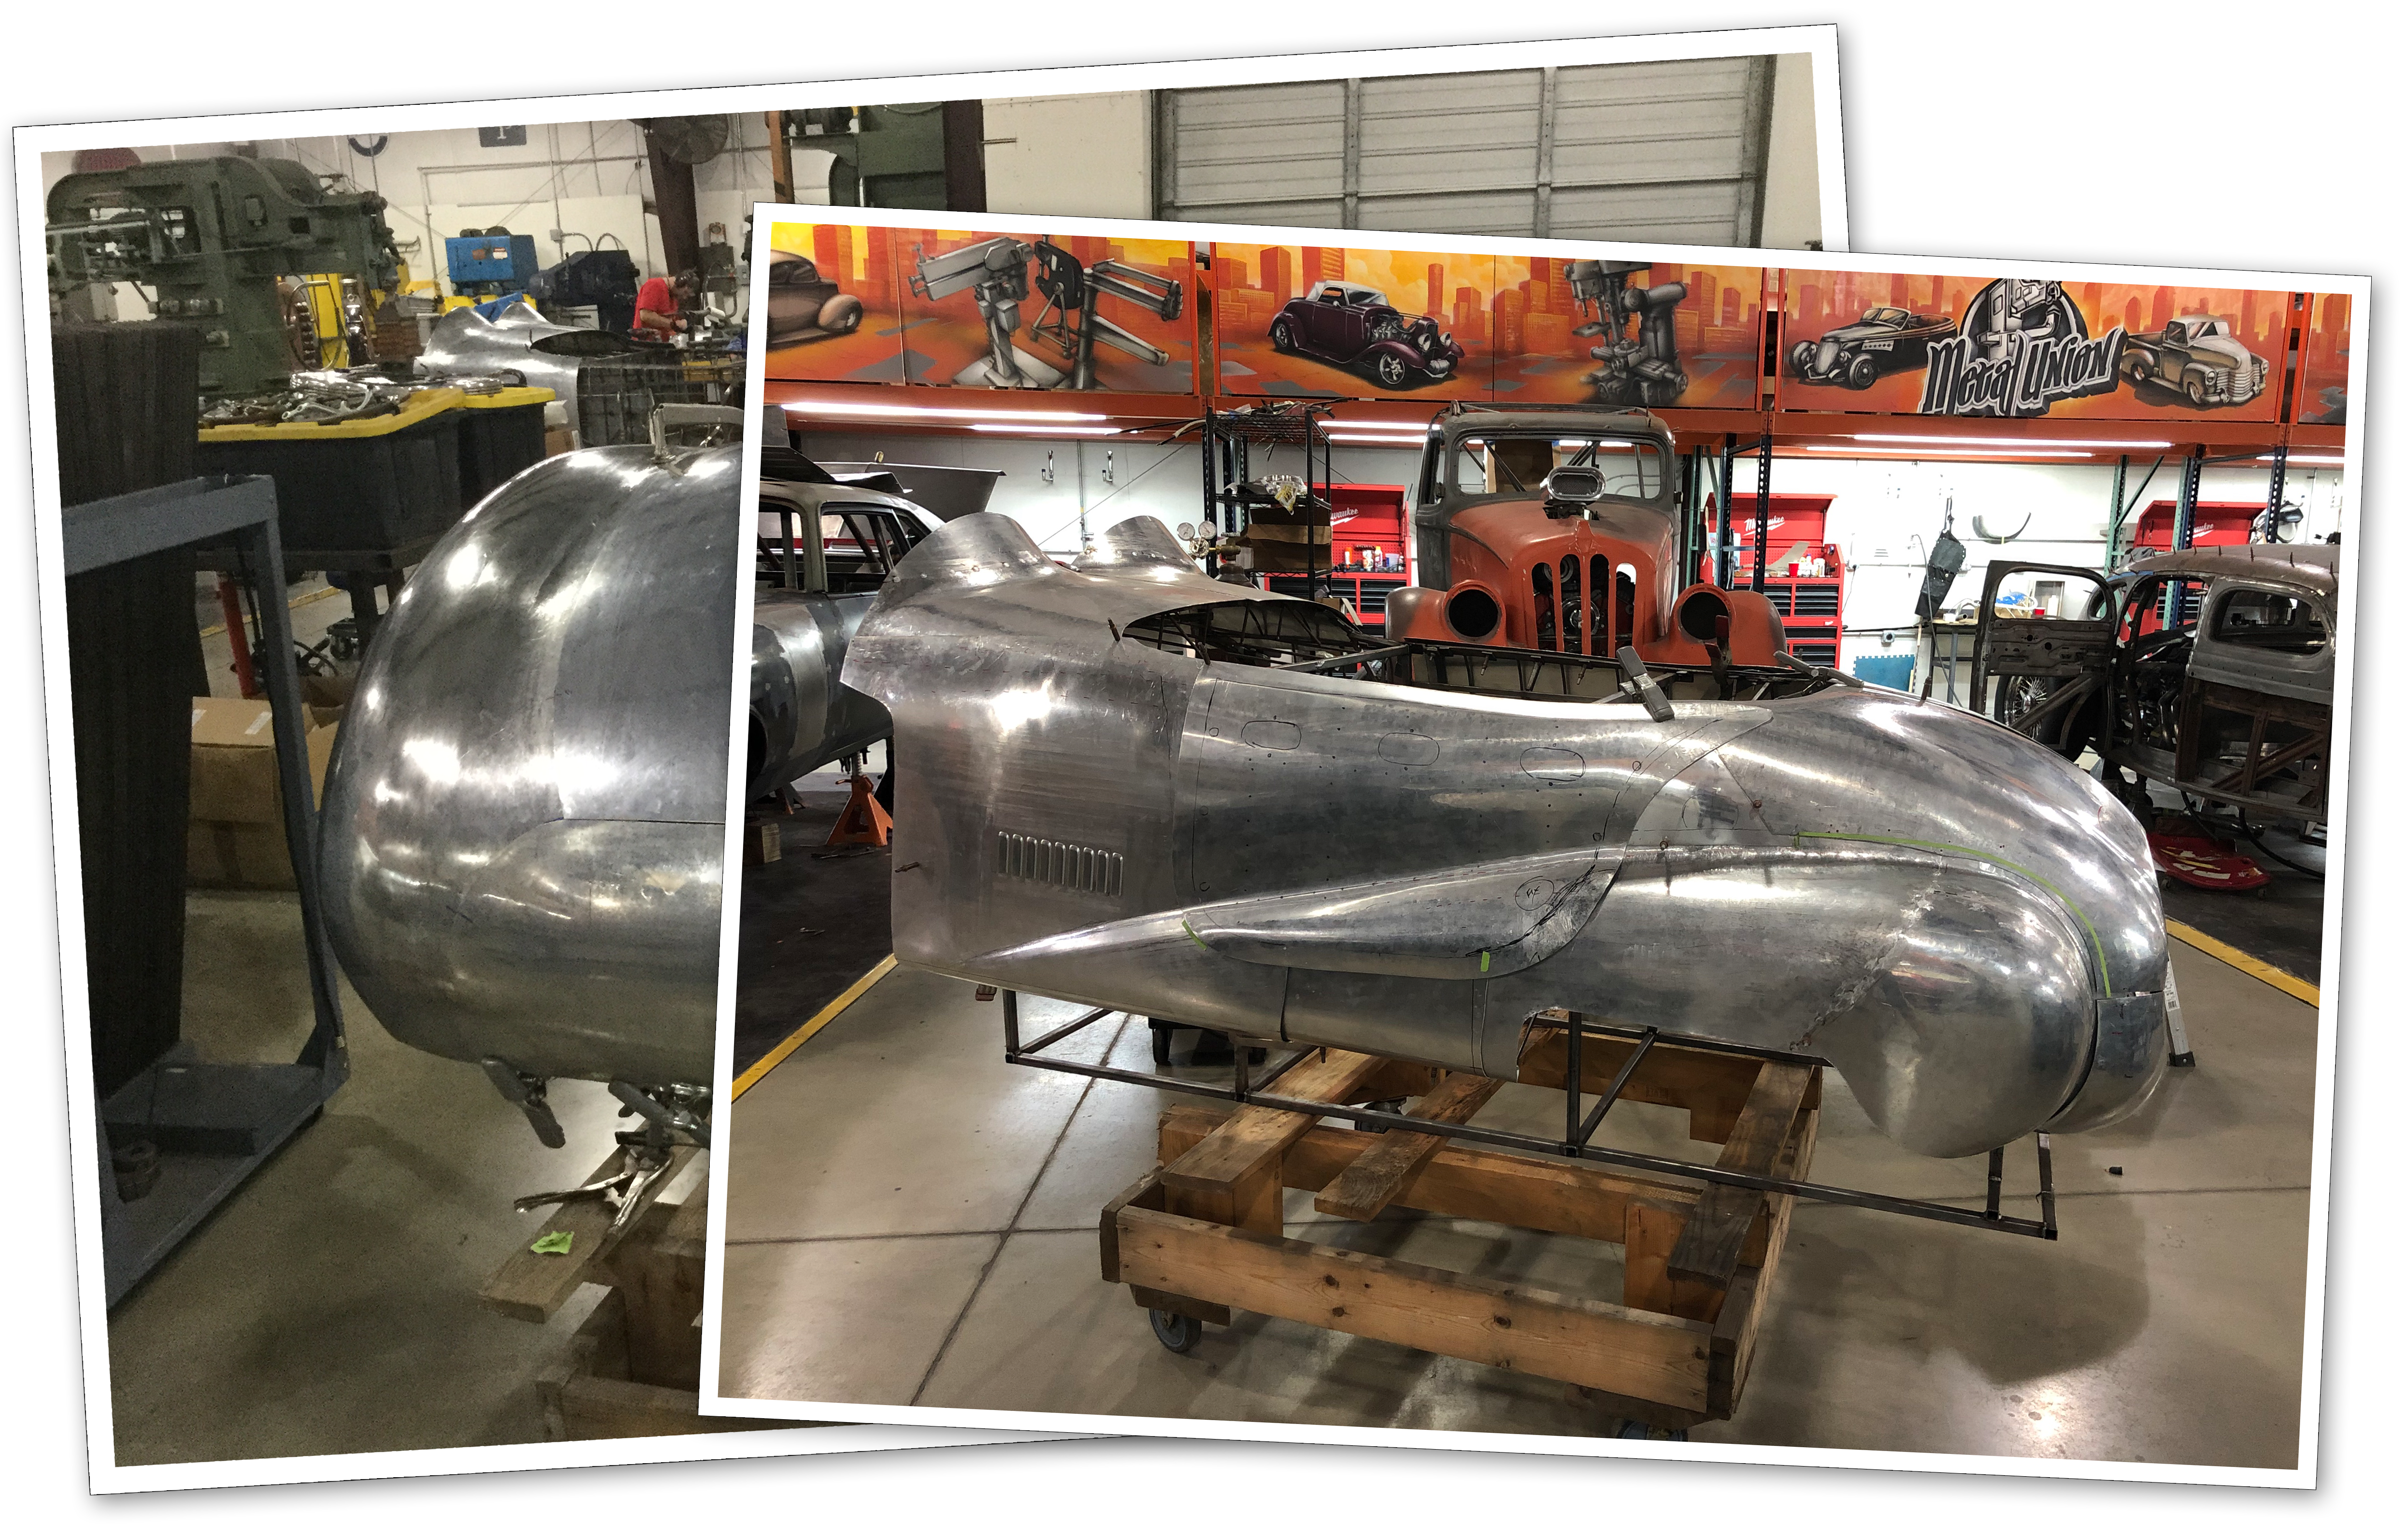 Sheet metal fabrication solutions from Metal Union Speed Shop